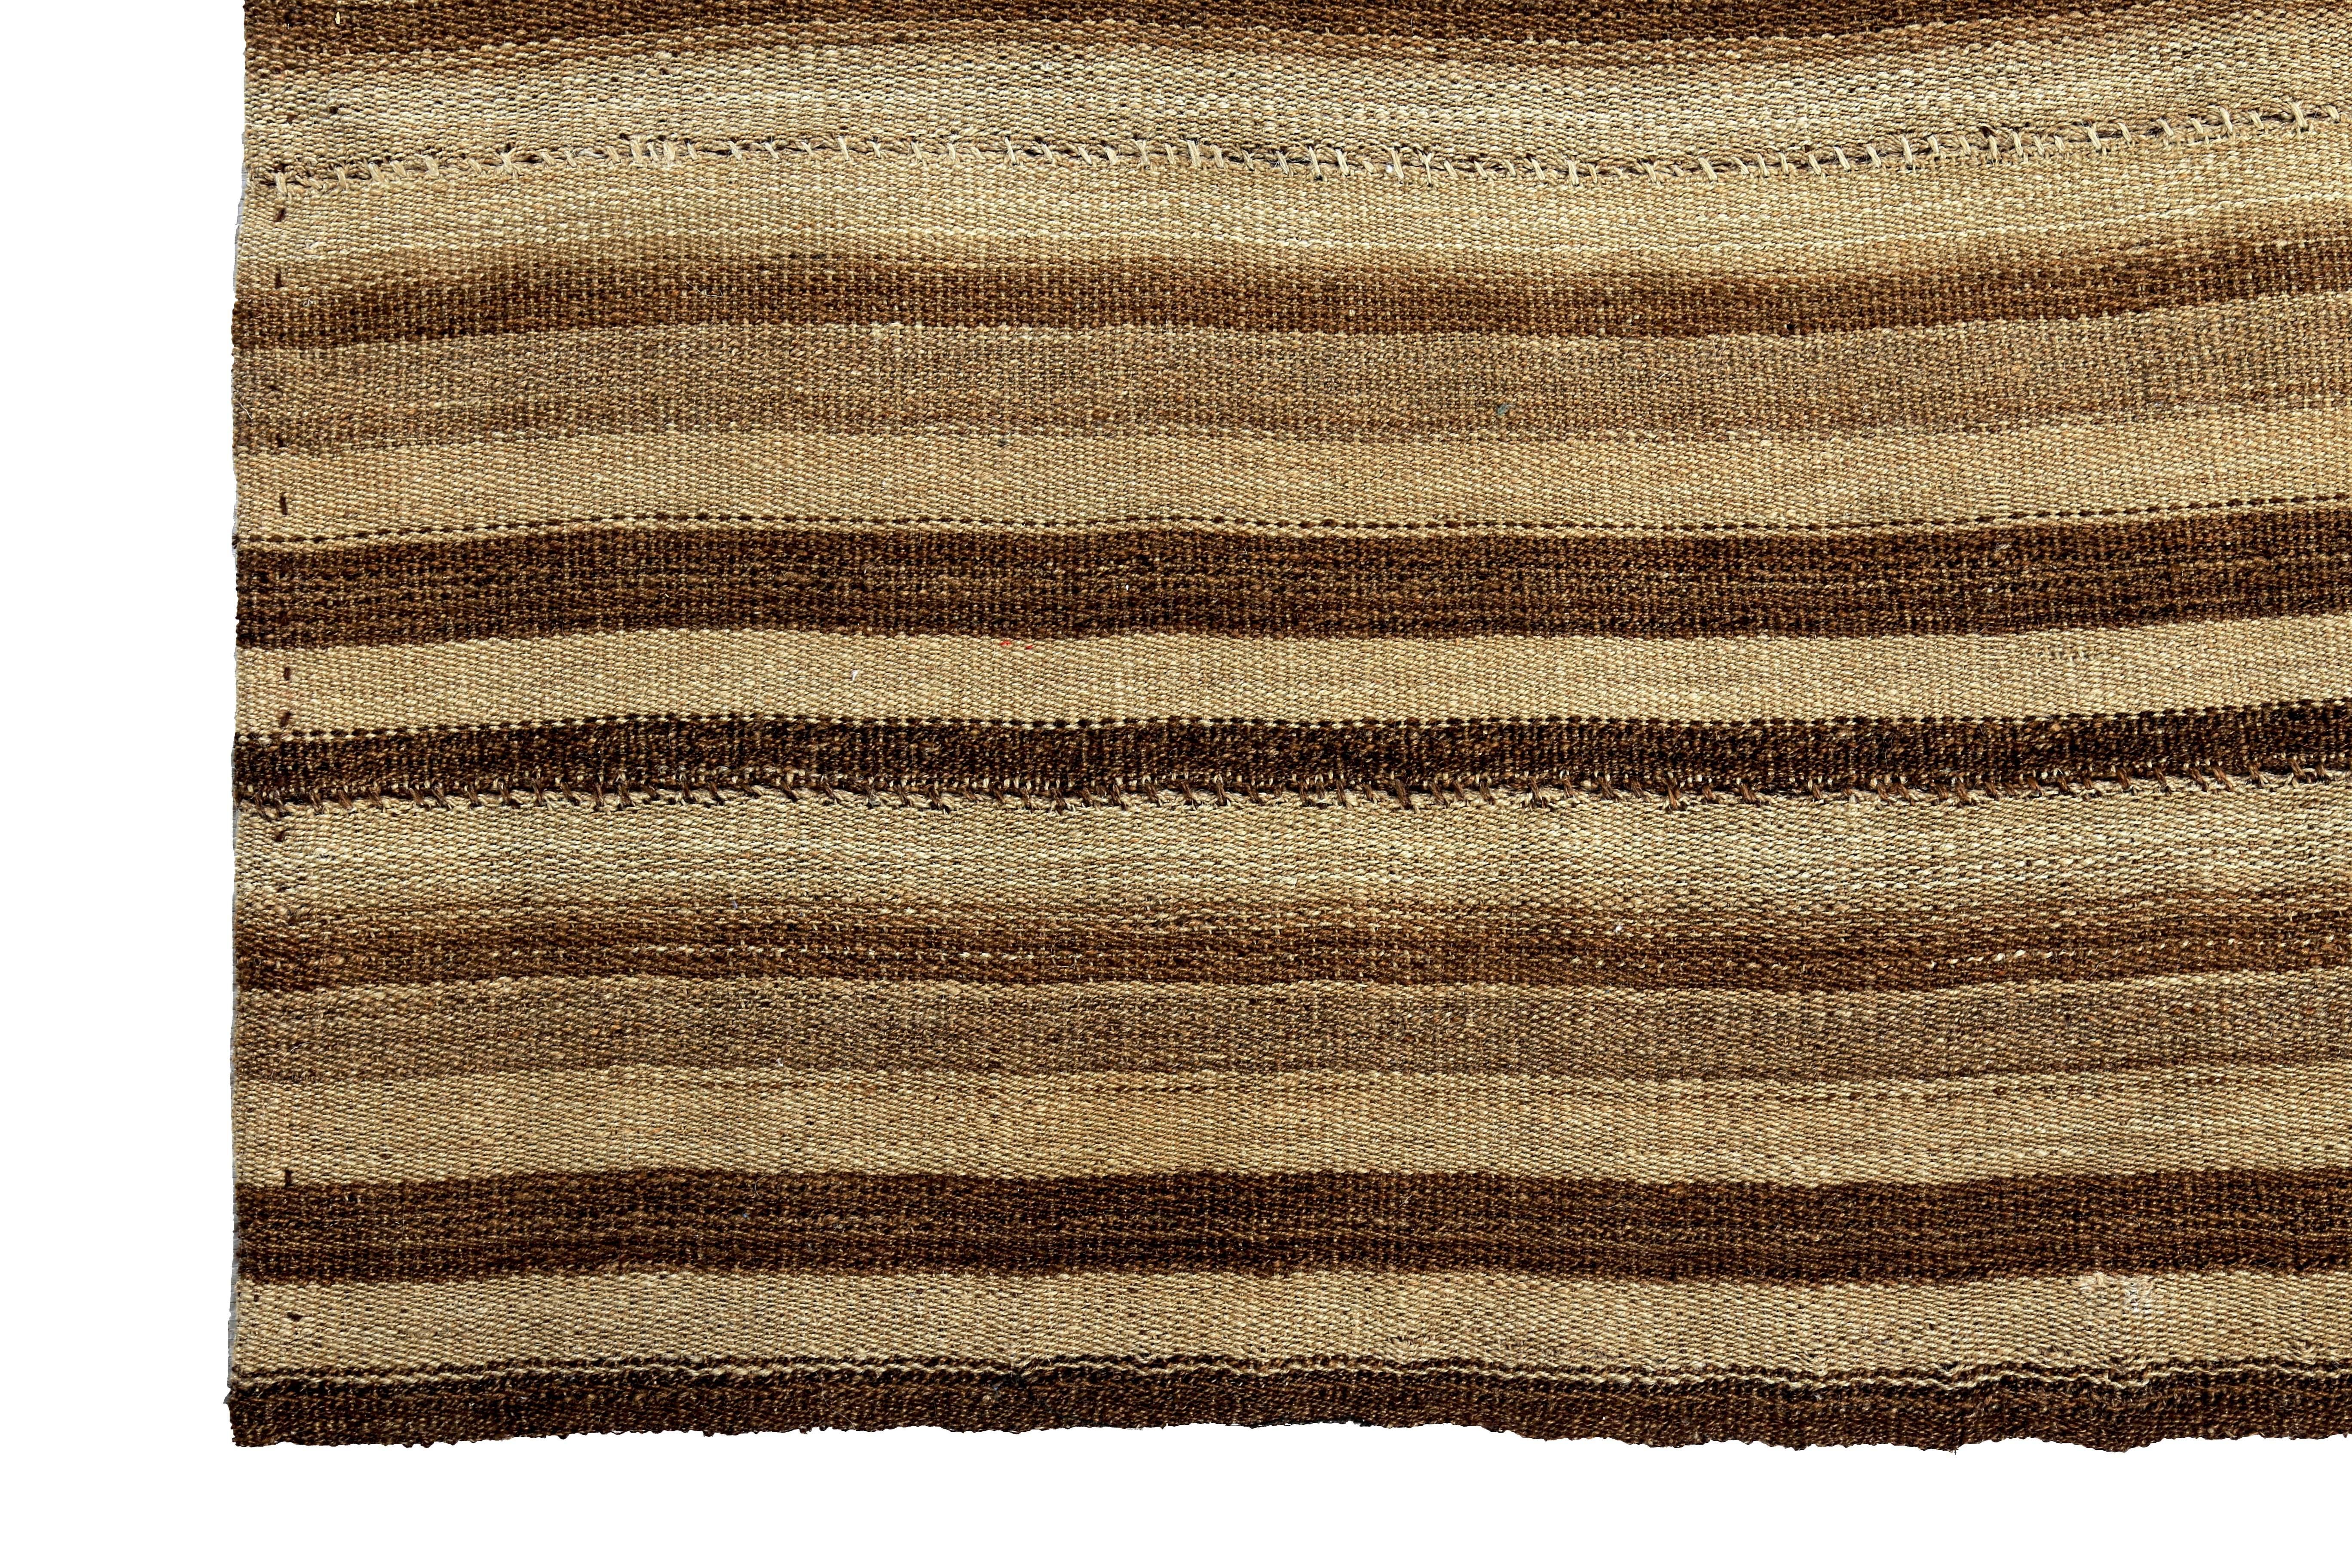 Hand-Woven Contemporary Turkish Kilim Rug with Black and Brown Stripes on Beige Field For Sale